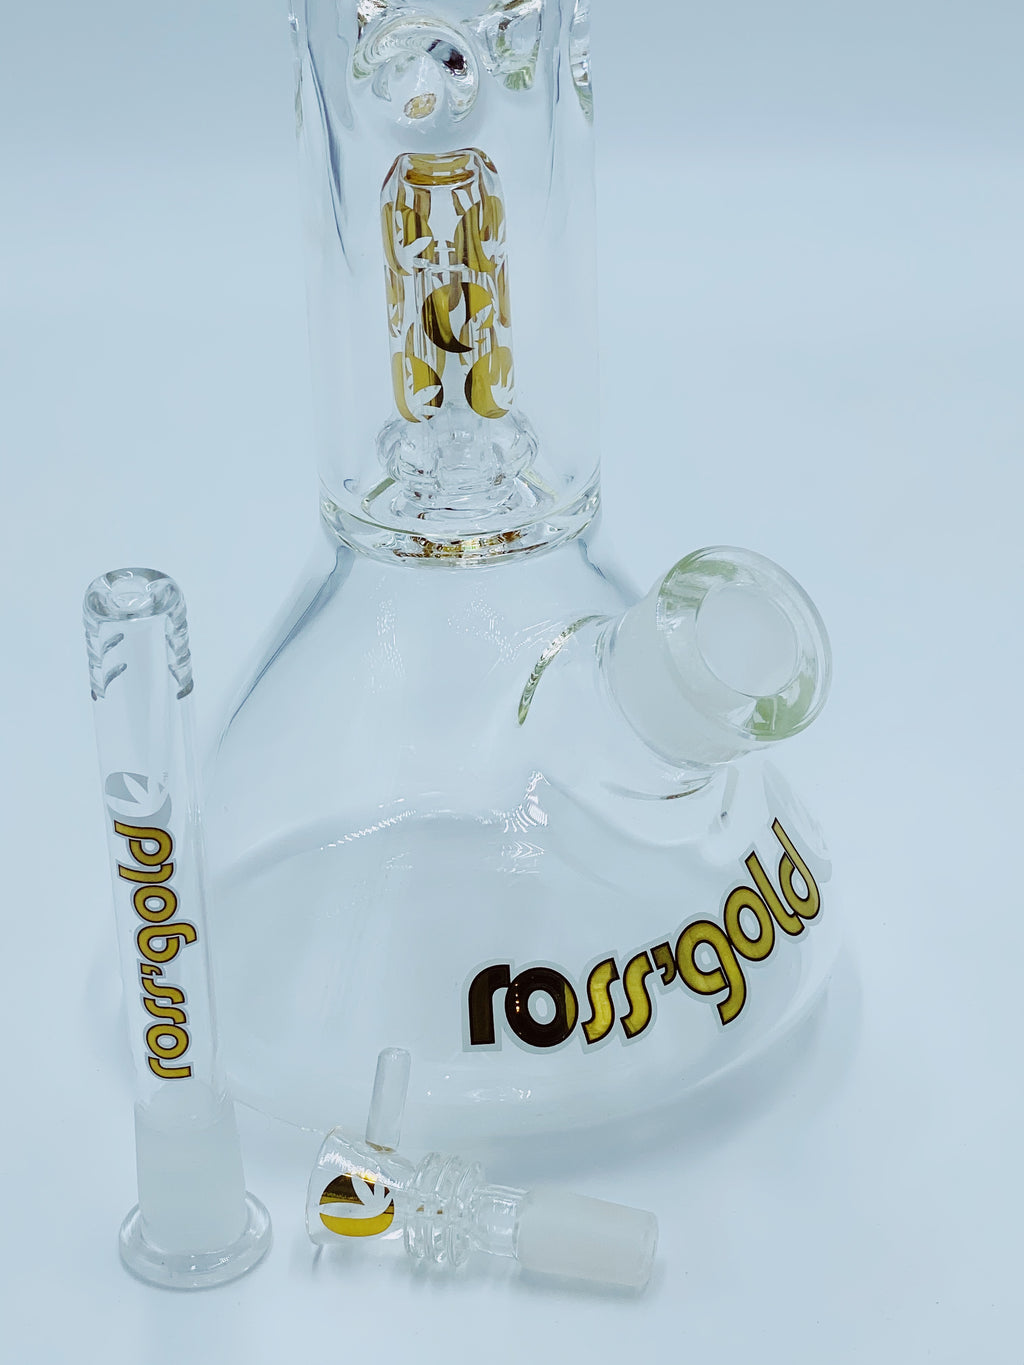 ROSS GOLD PERCOLATOR - Smoke Country - Land of the artistic glass blown bongs